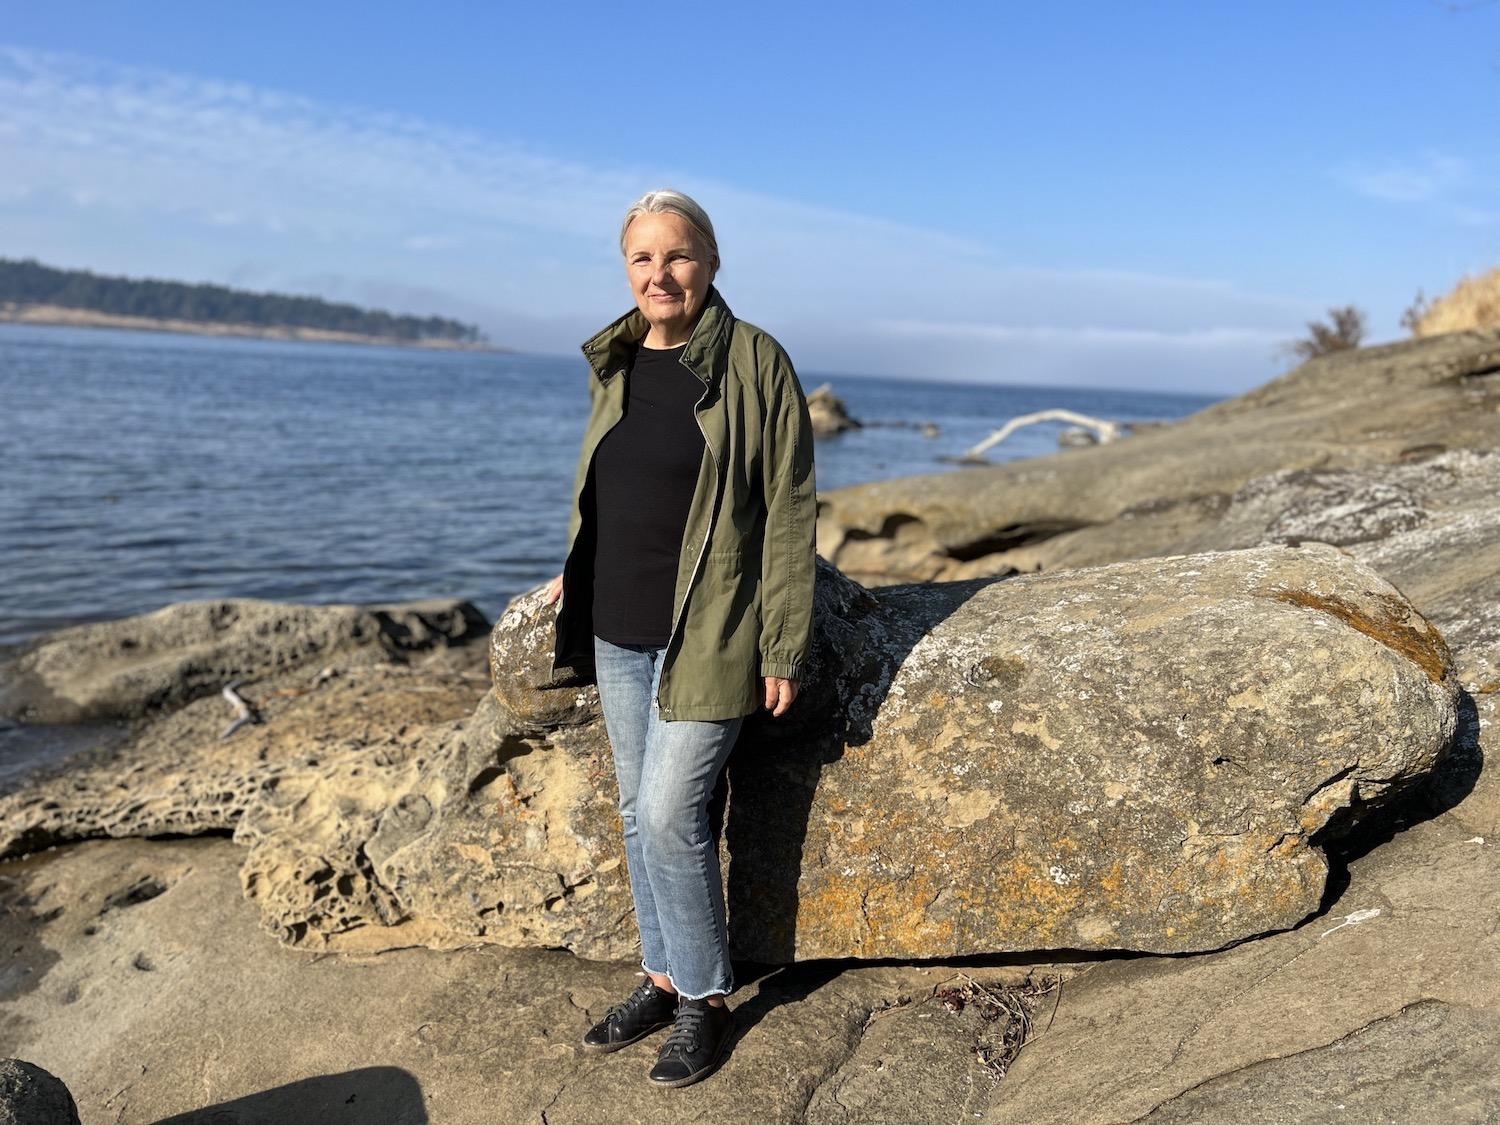 Maureen Welton, vice-chair of the Saturna Island Marine Research and Education Society (SIMRES), stands by rocks with tafoni erosion patterns.